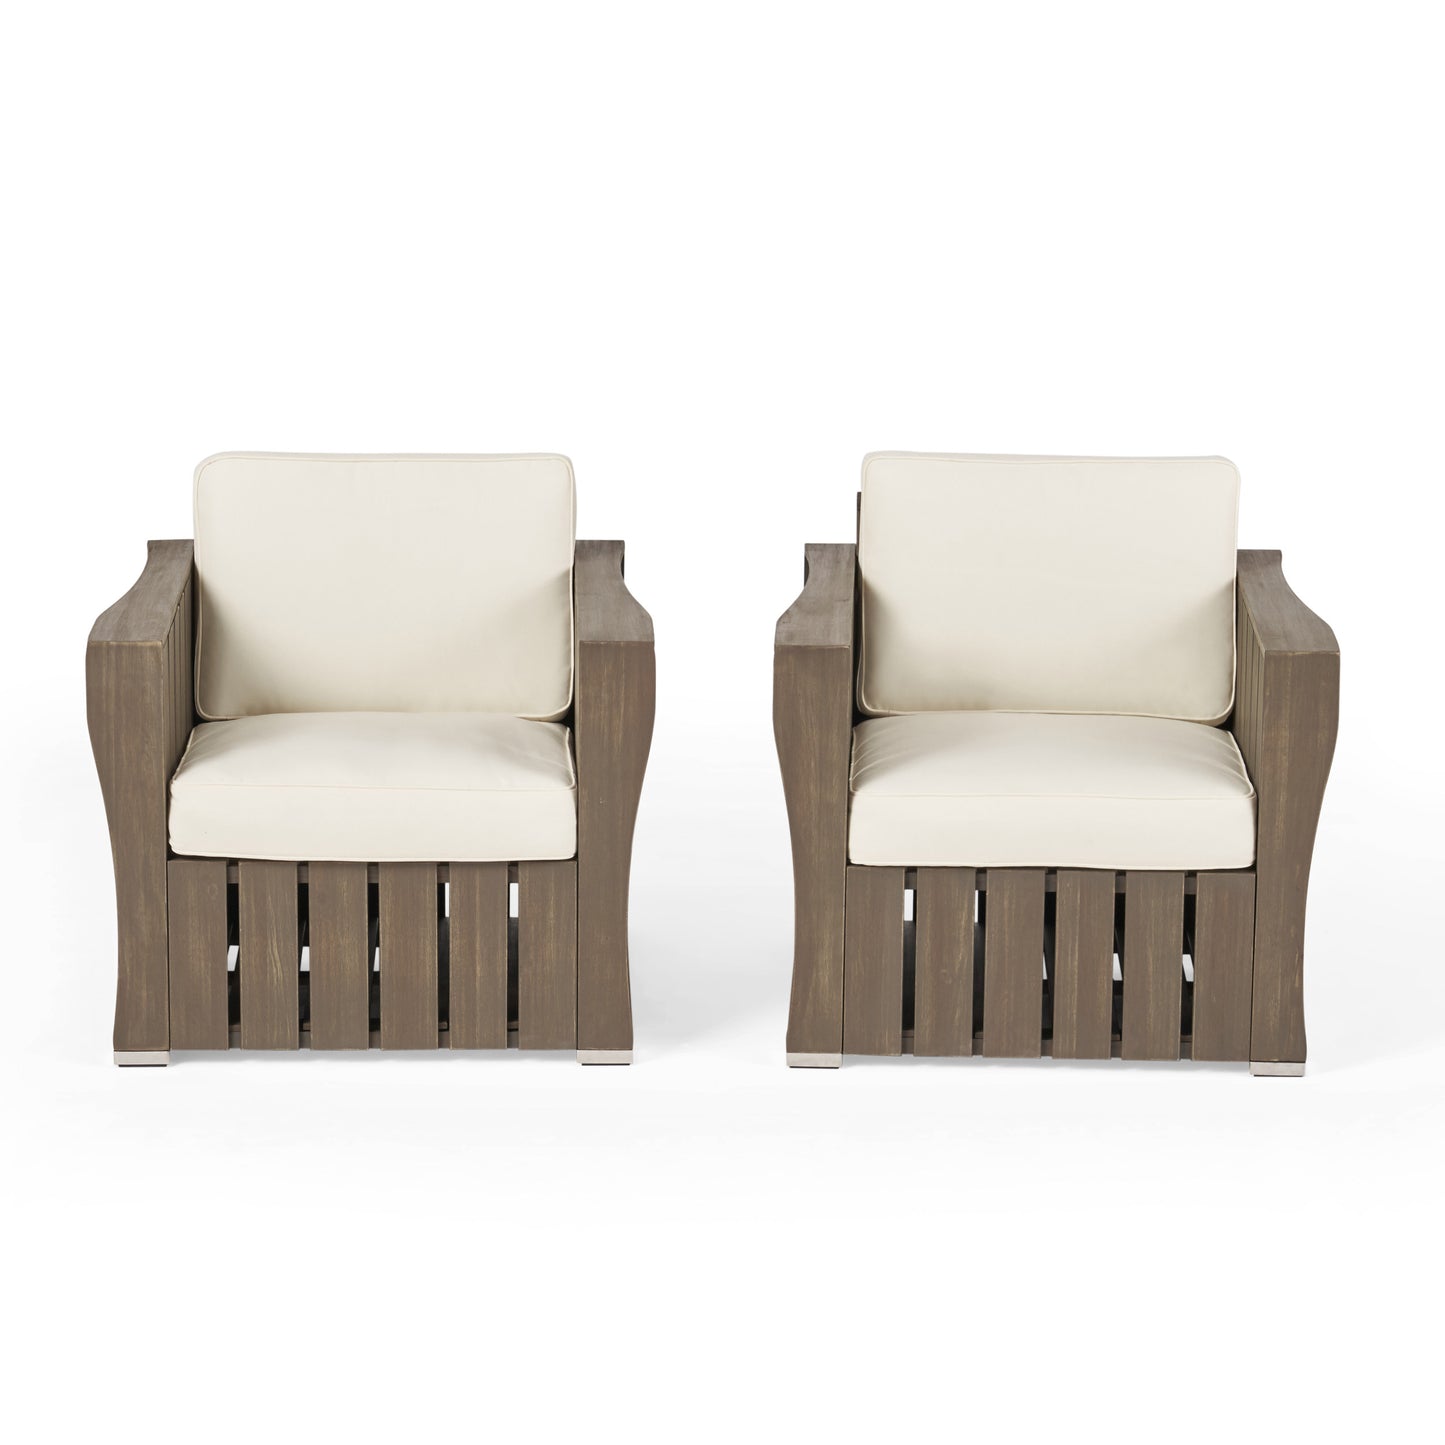 Edward Outdoor Acacia Wood Club Chairs with Water Resistant Cushions (Set of 2)